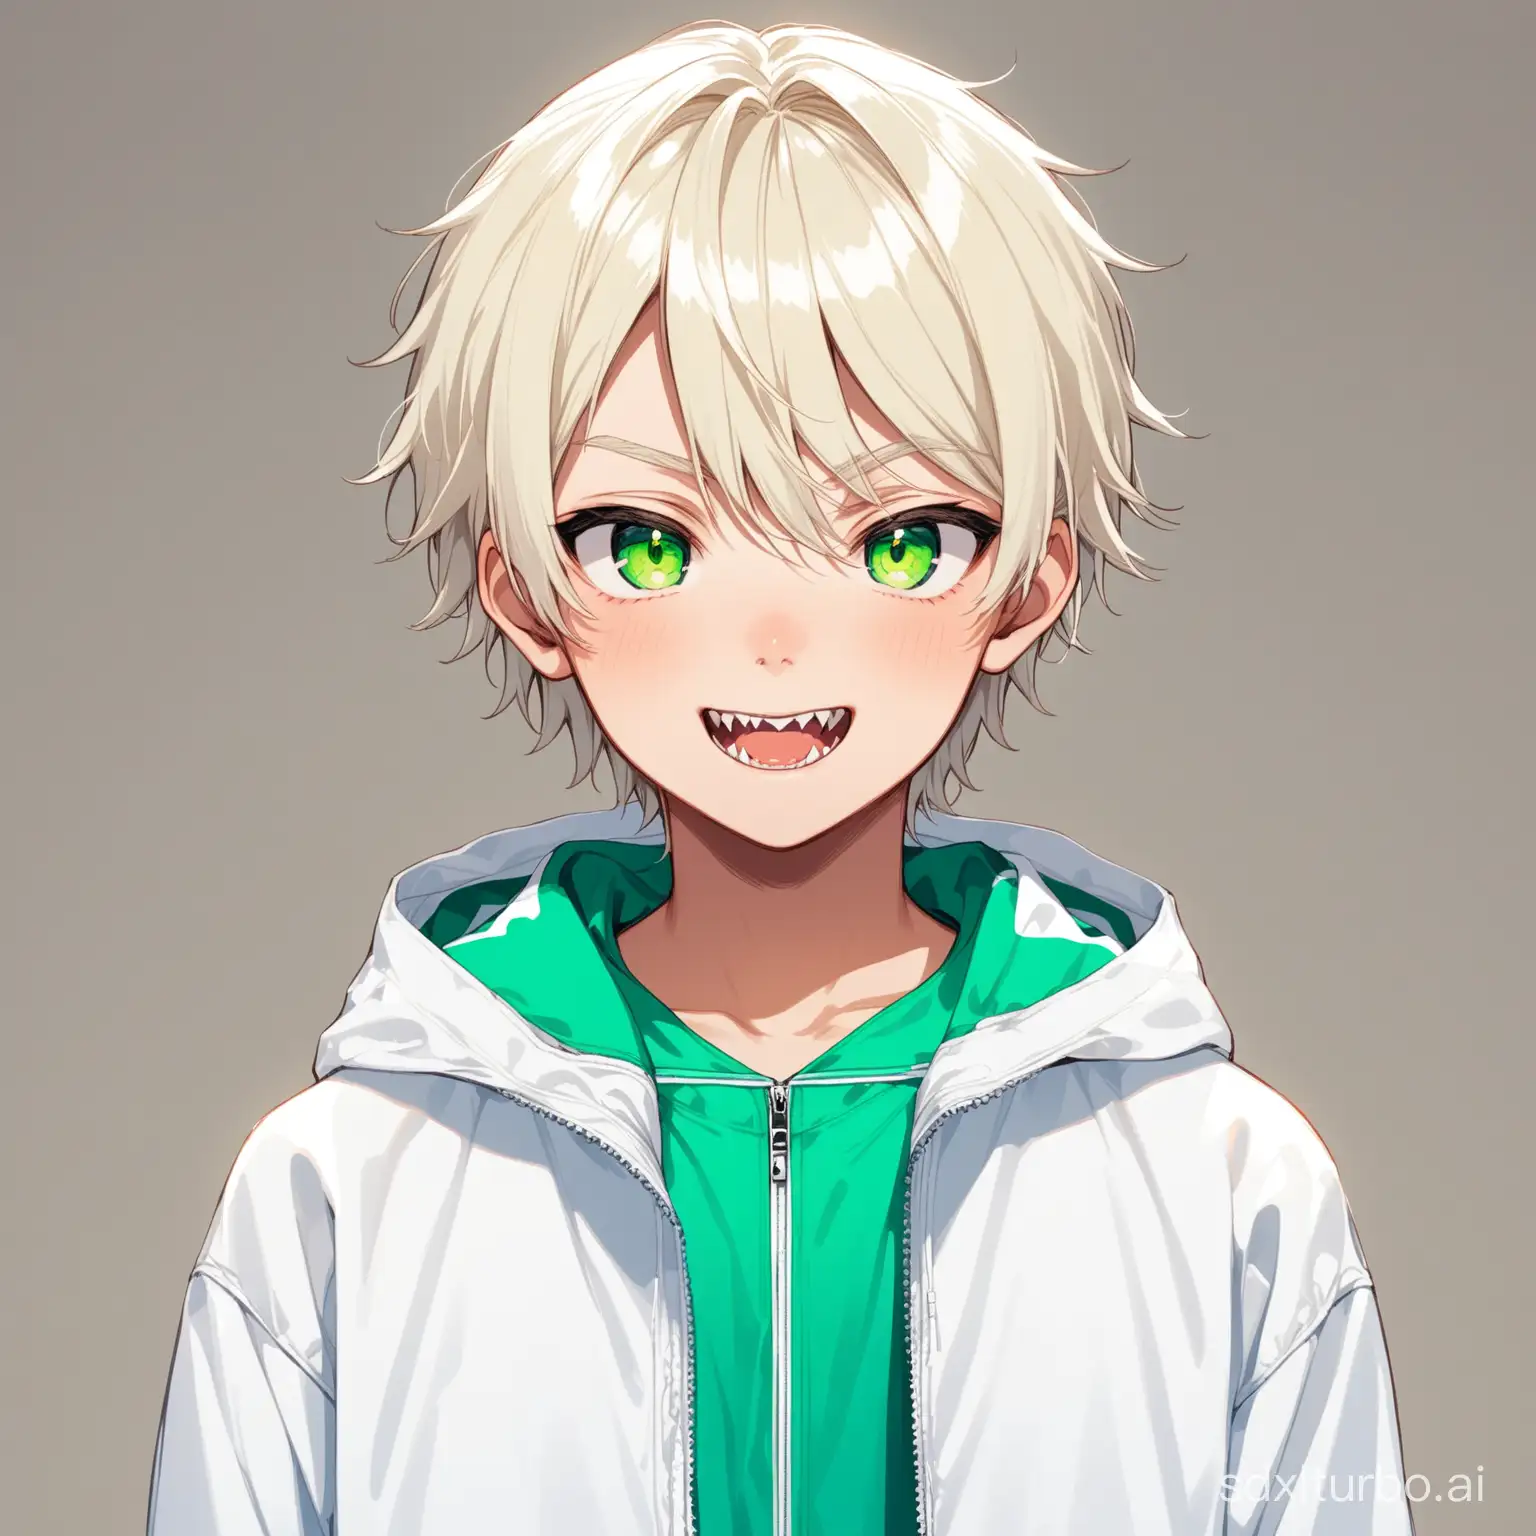 A boy with platinum blonde hair, green eyes, small fangs and braids, wearing a white windbreaker, standing at 175 cm tall.